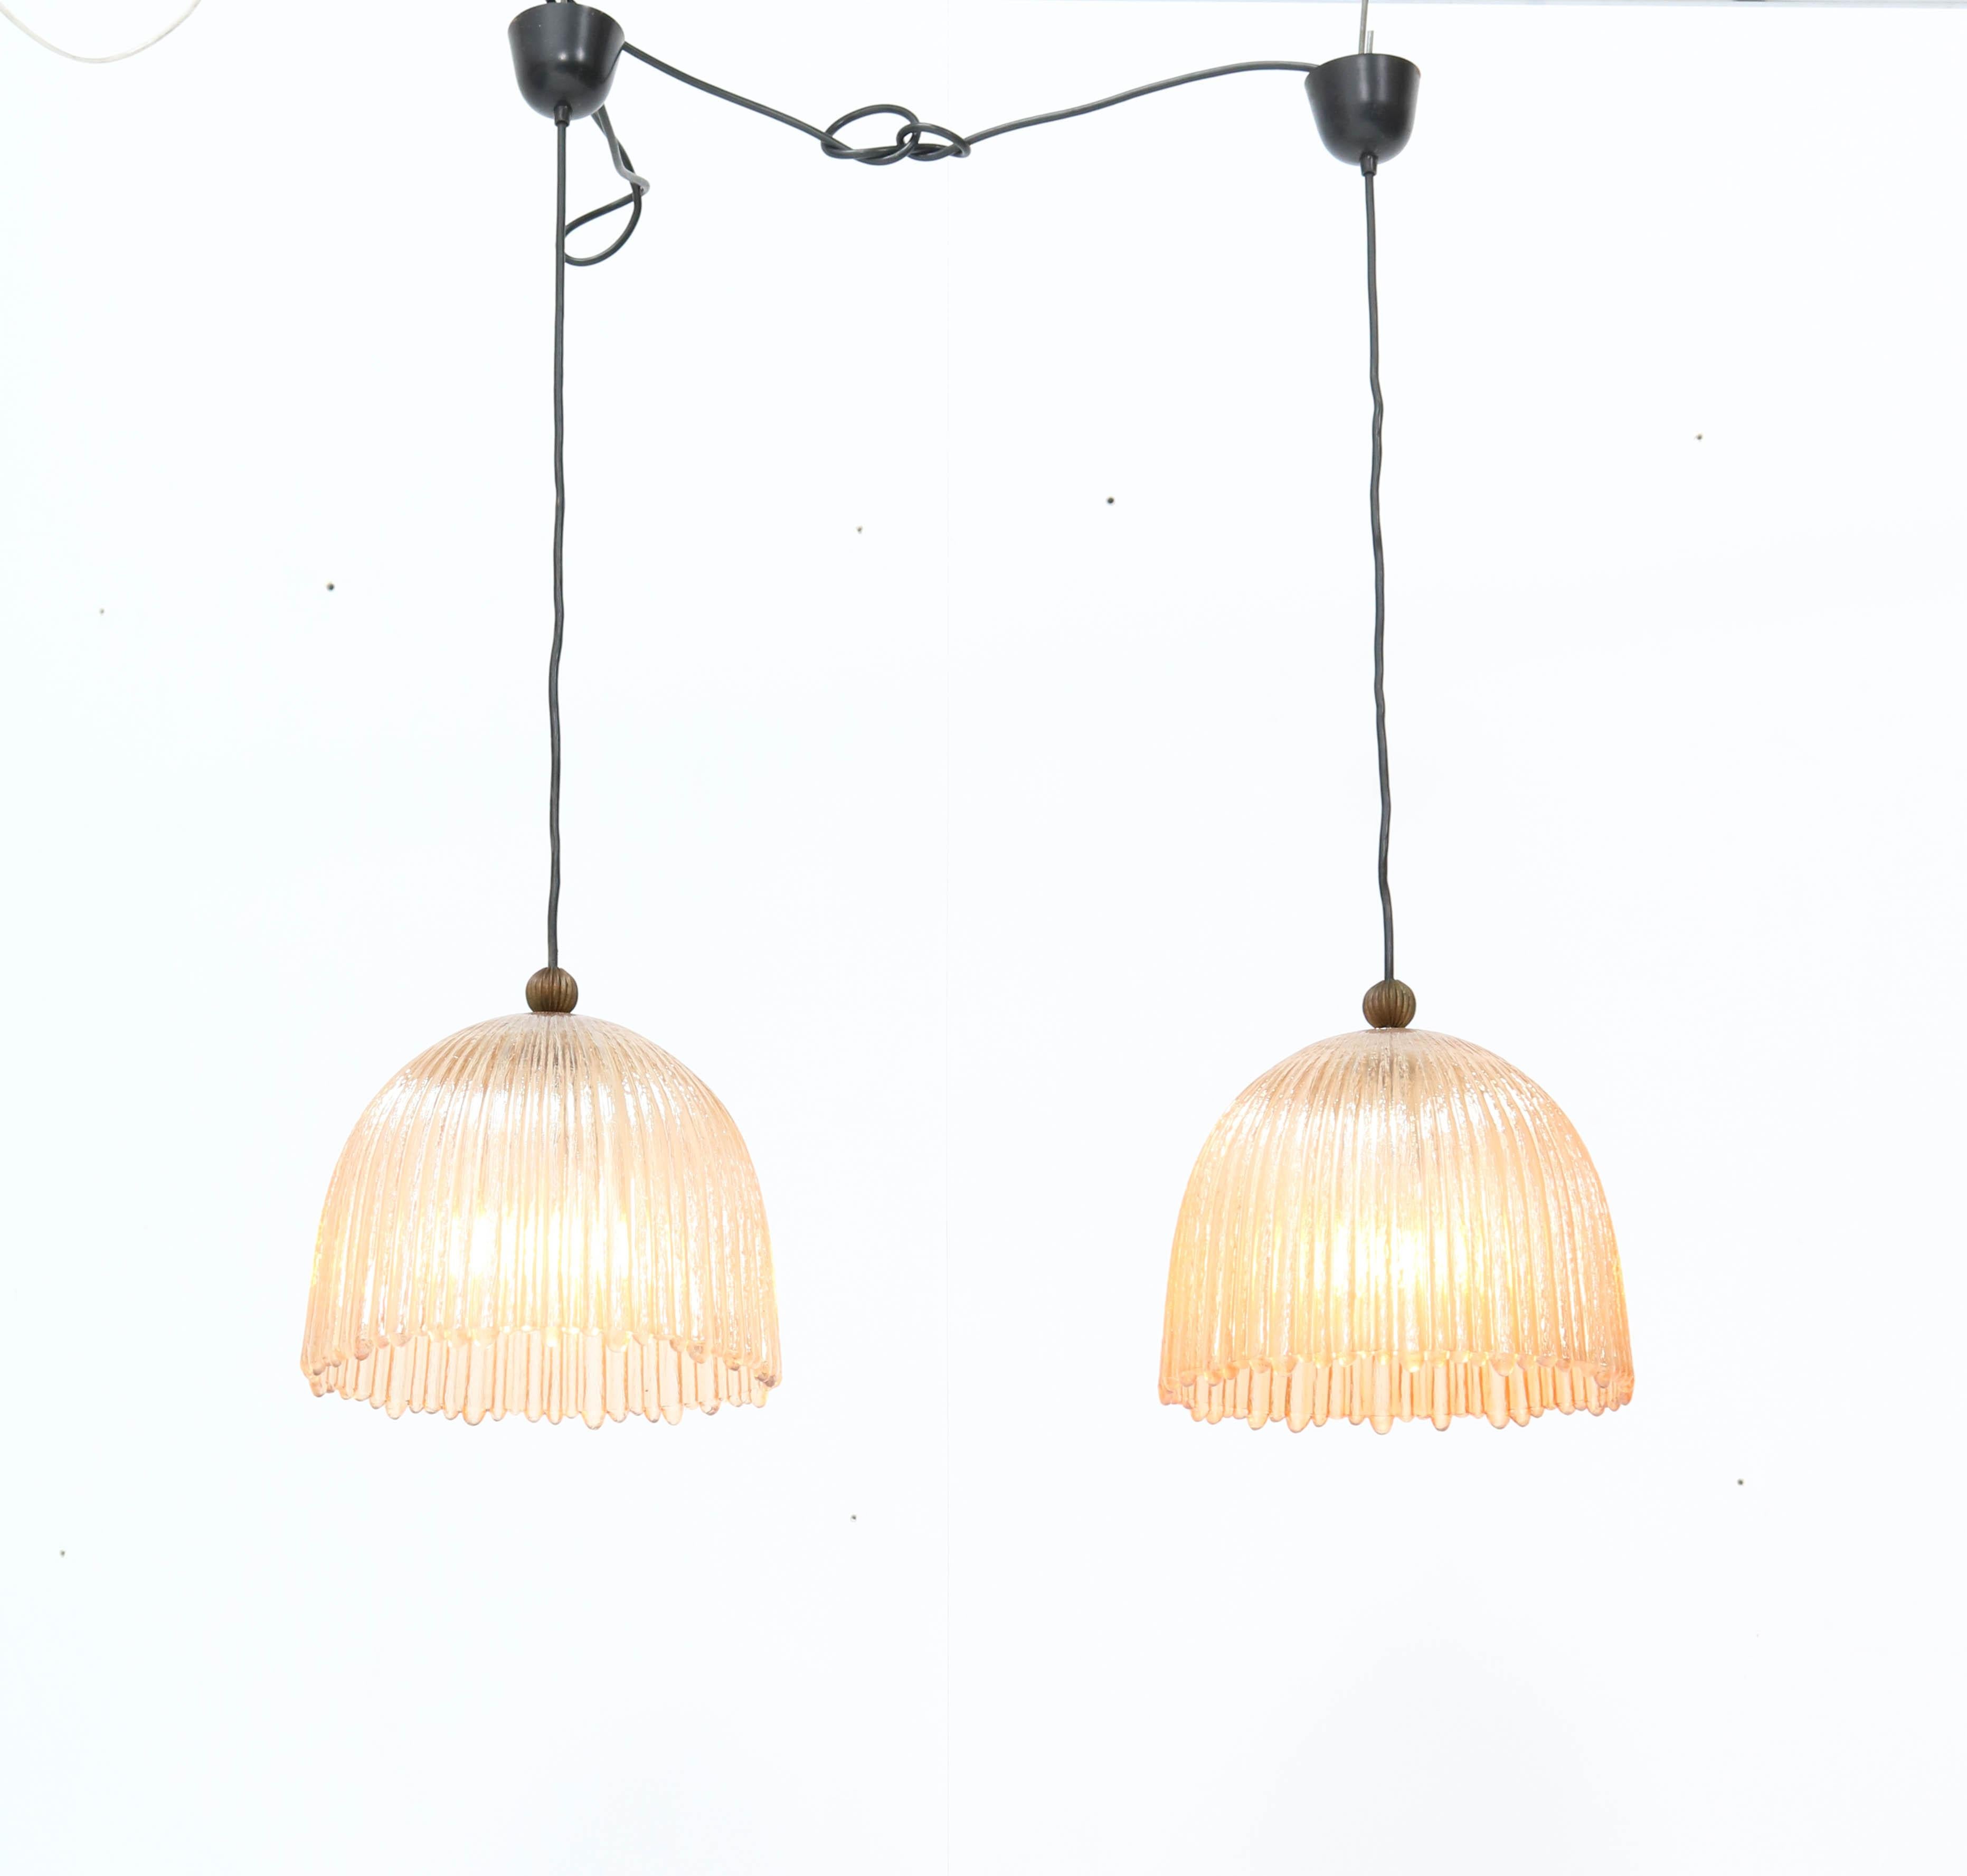 Stunning pair of Mid-Century Modern pendant lights.
Striking Italian design from the 1960s.
Original Murano shades.
Each pendant has one socket for a E-27 light bulb.
In good original condition with a beautiful patina.